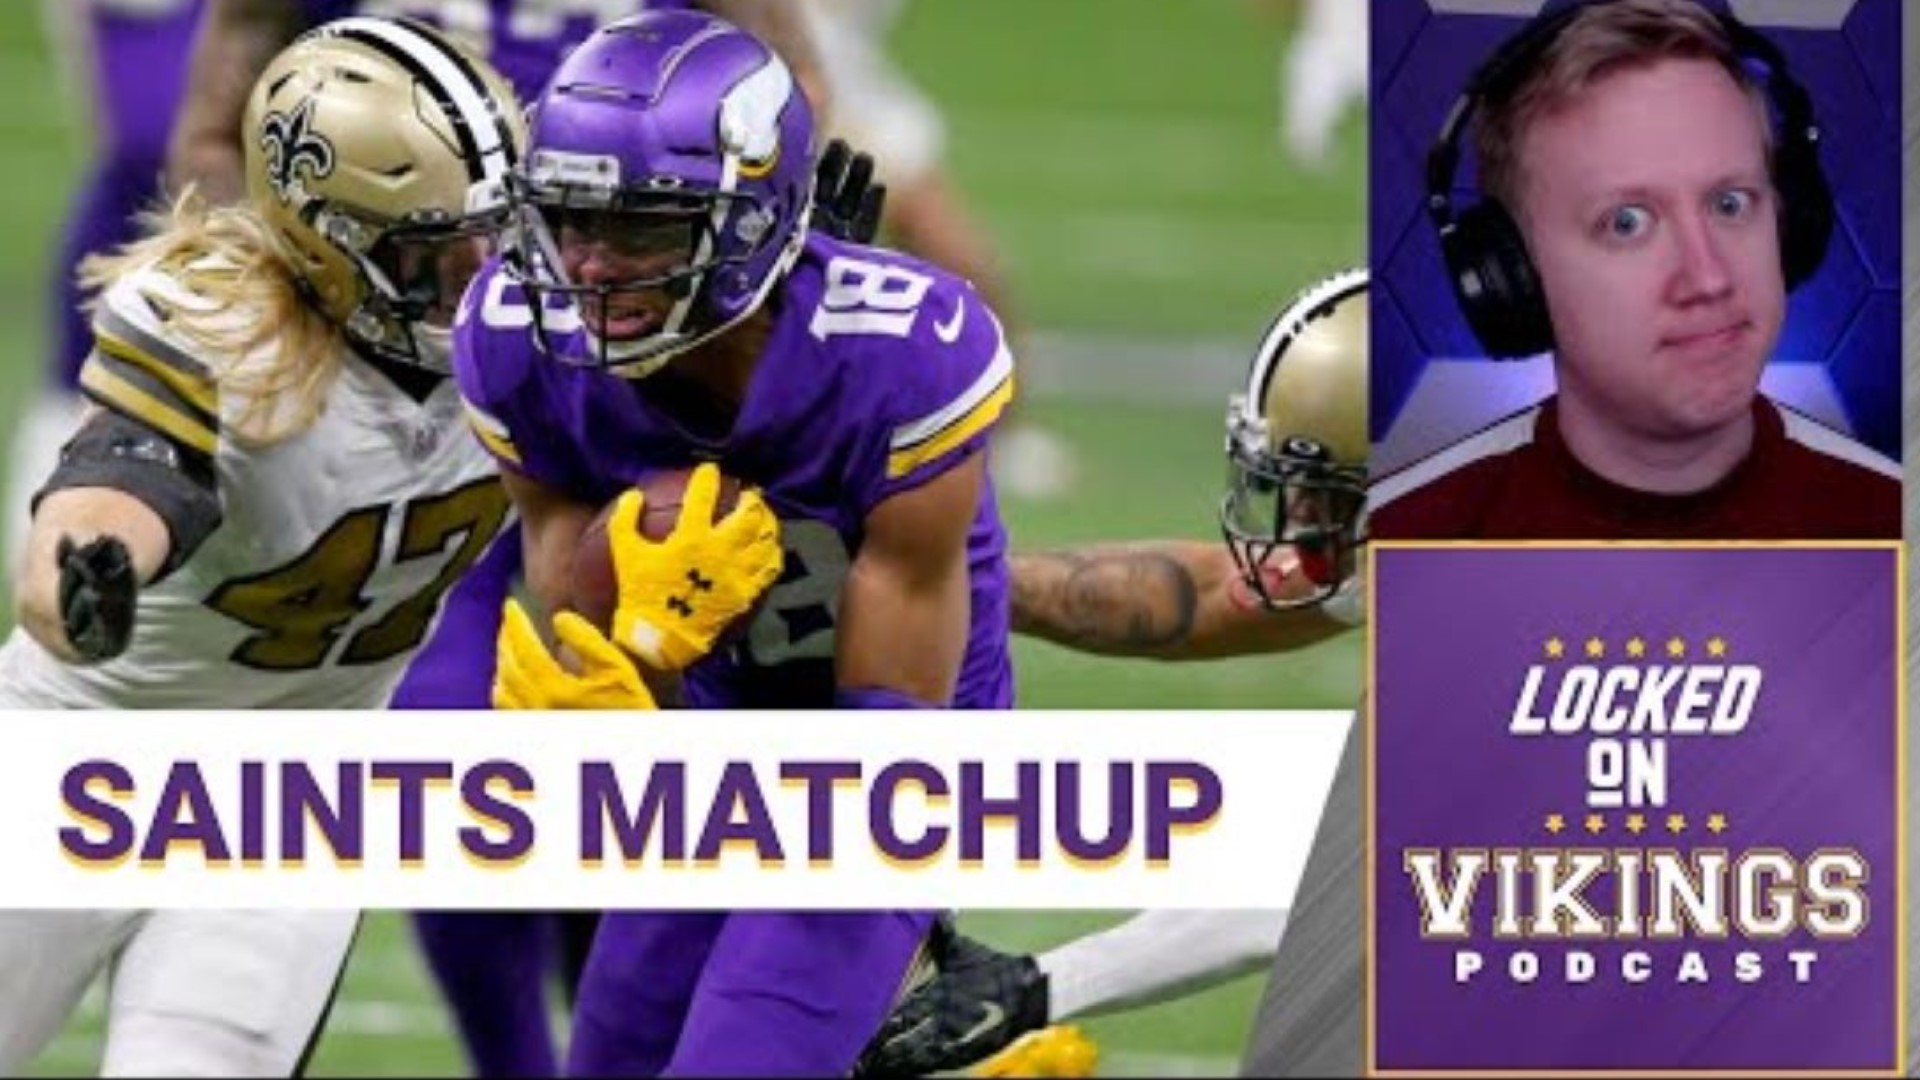 Will the Vikings be able to prey on Jameis Winston and his interceptions, or with the Minnesota defensive woes get the best of them?